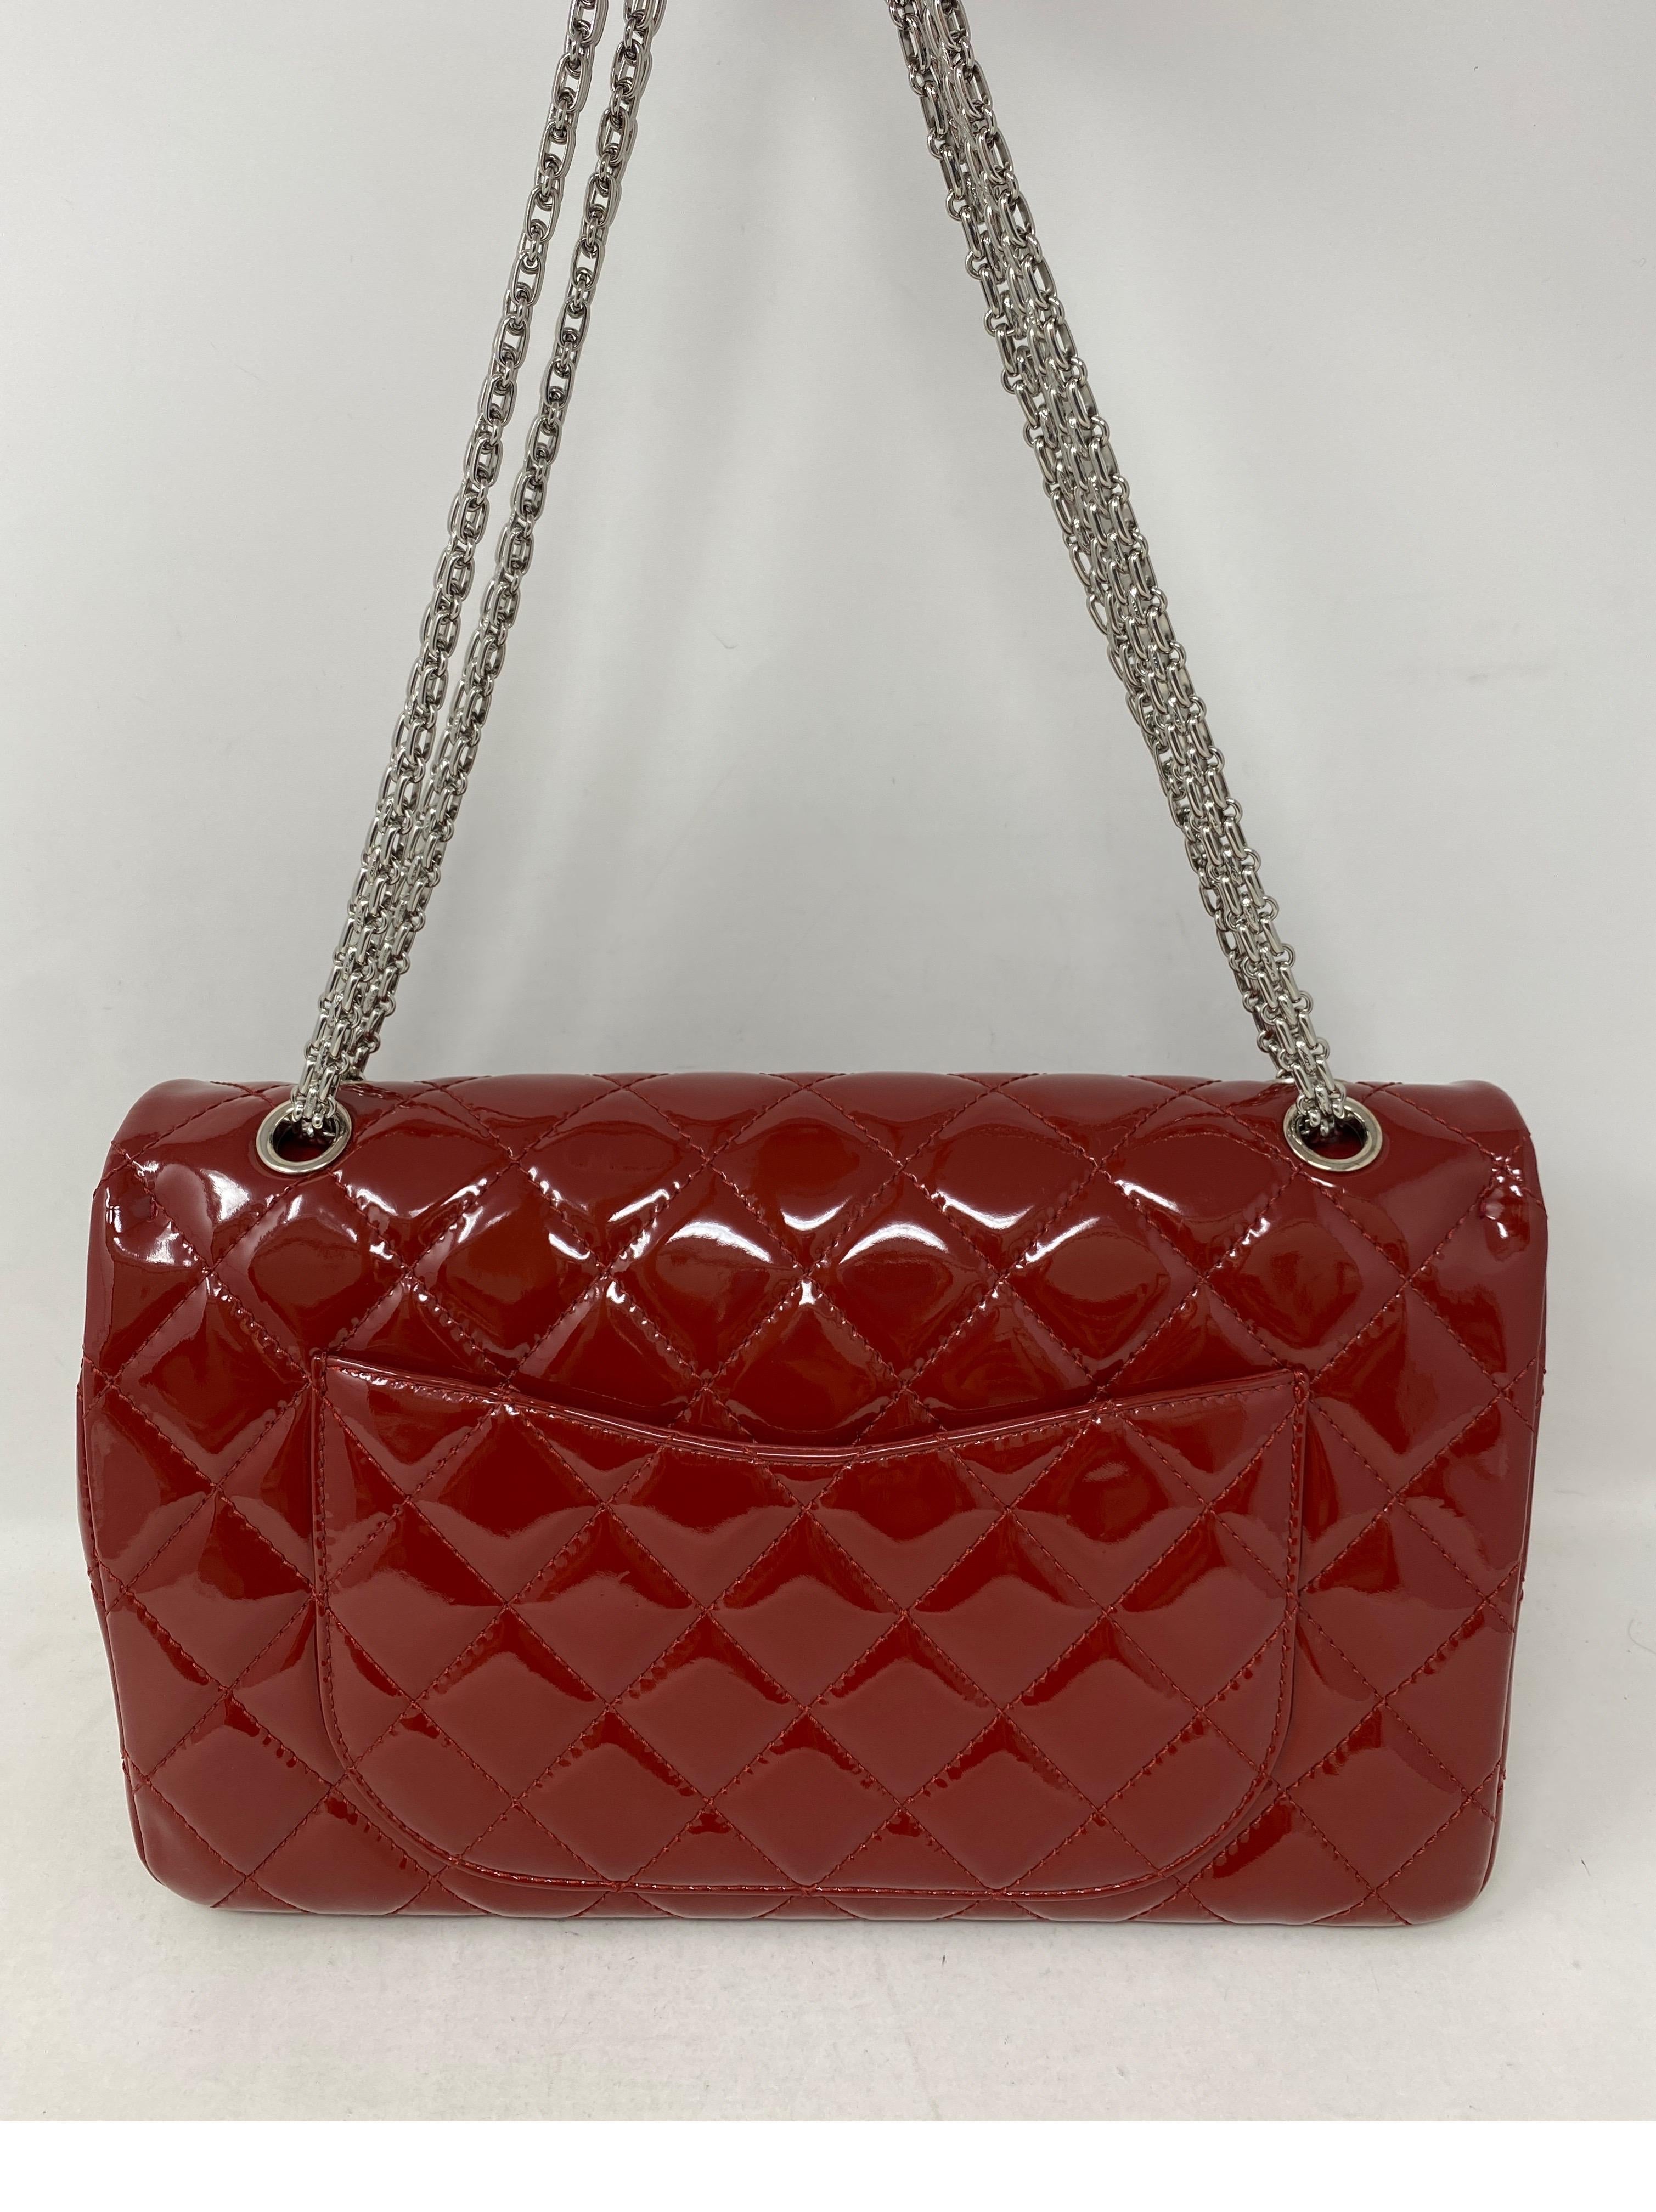 Chanel Red Jumbo Patent Reissue Leather Bag  2